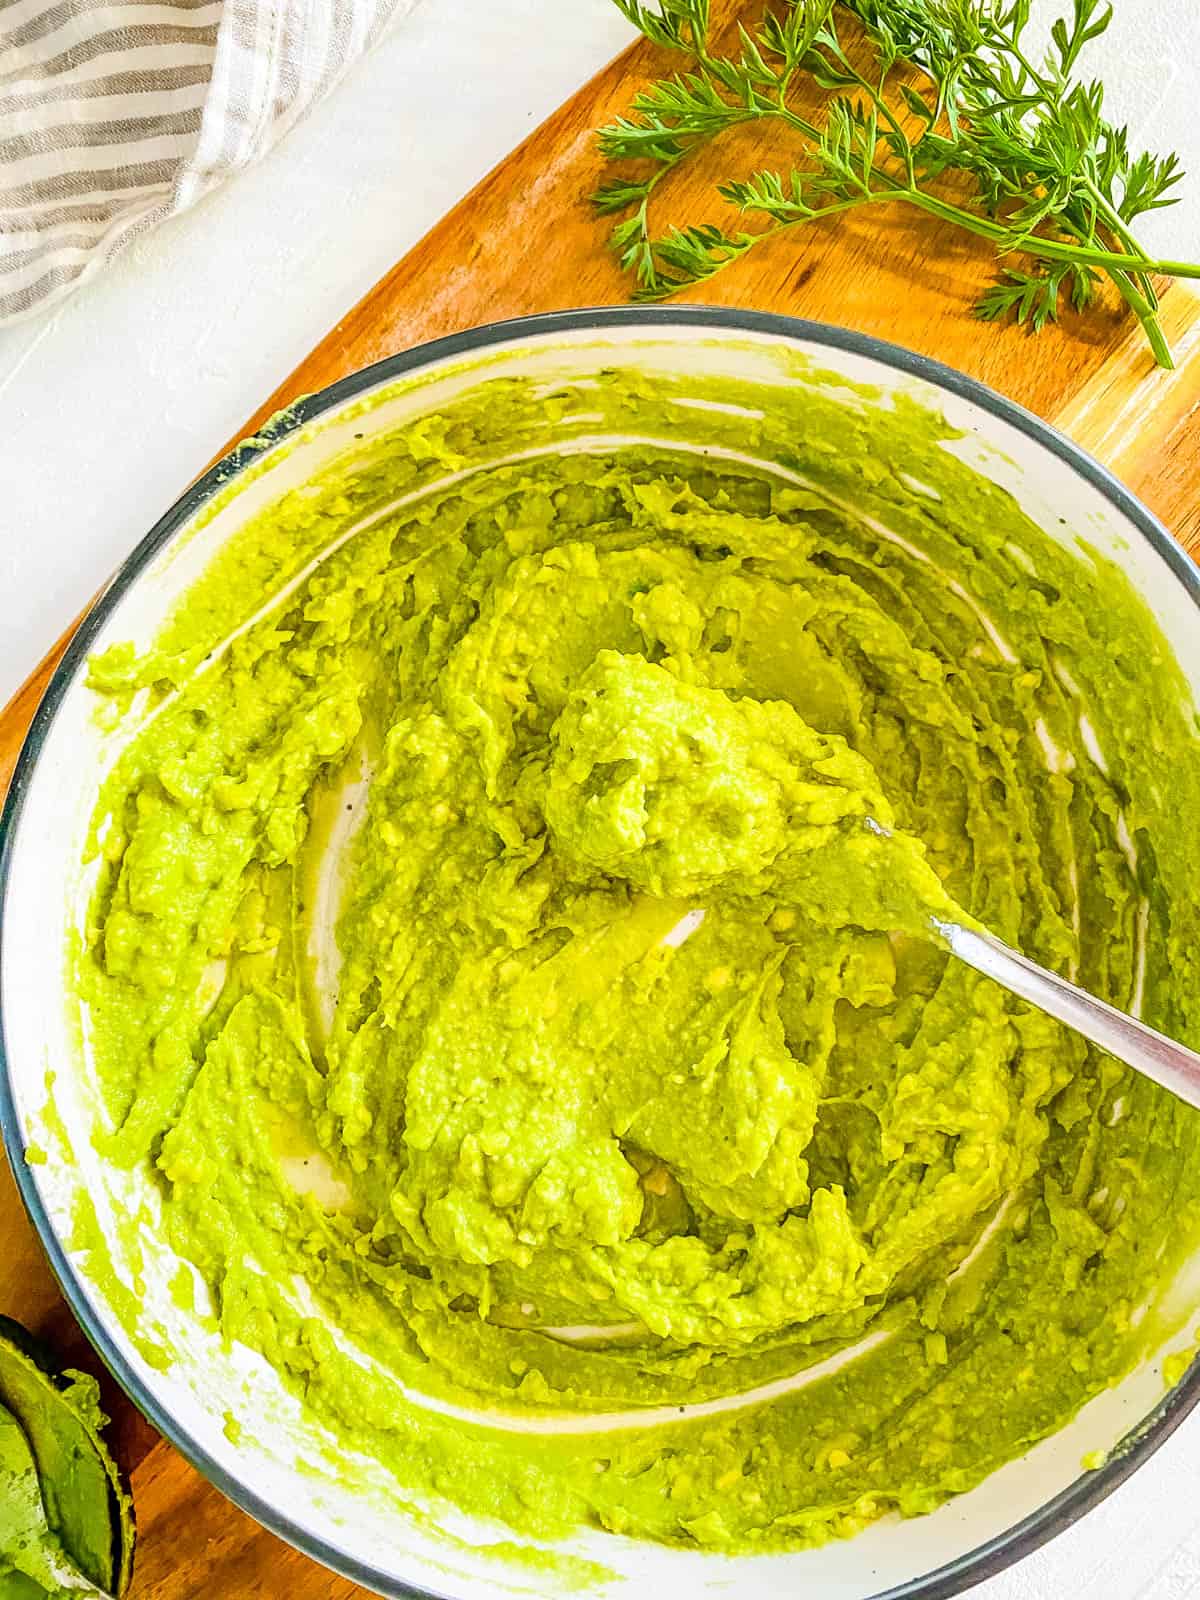 Mashed avocado in a white bowl with a spoon.